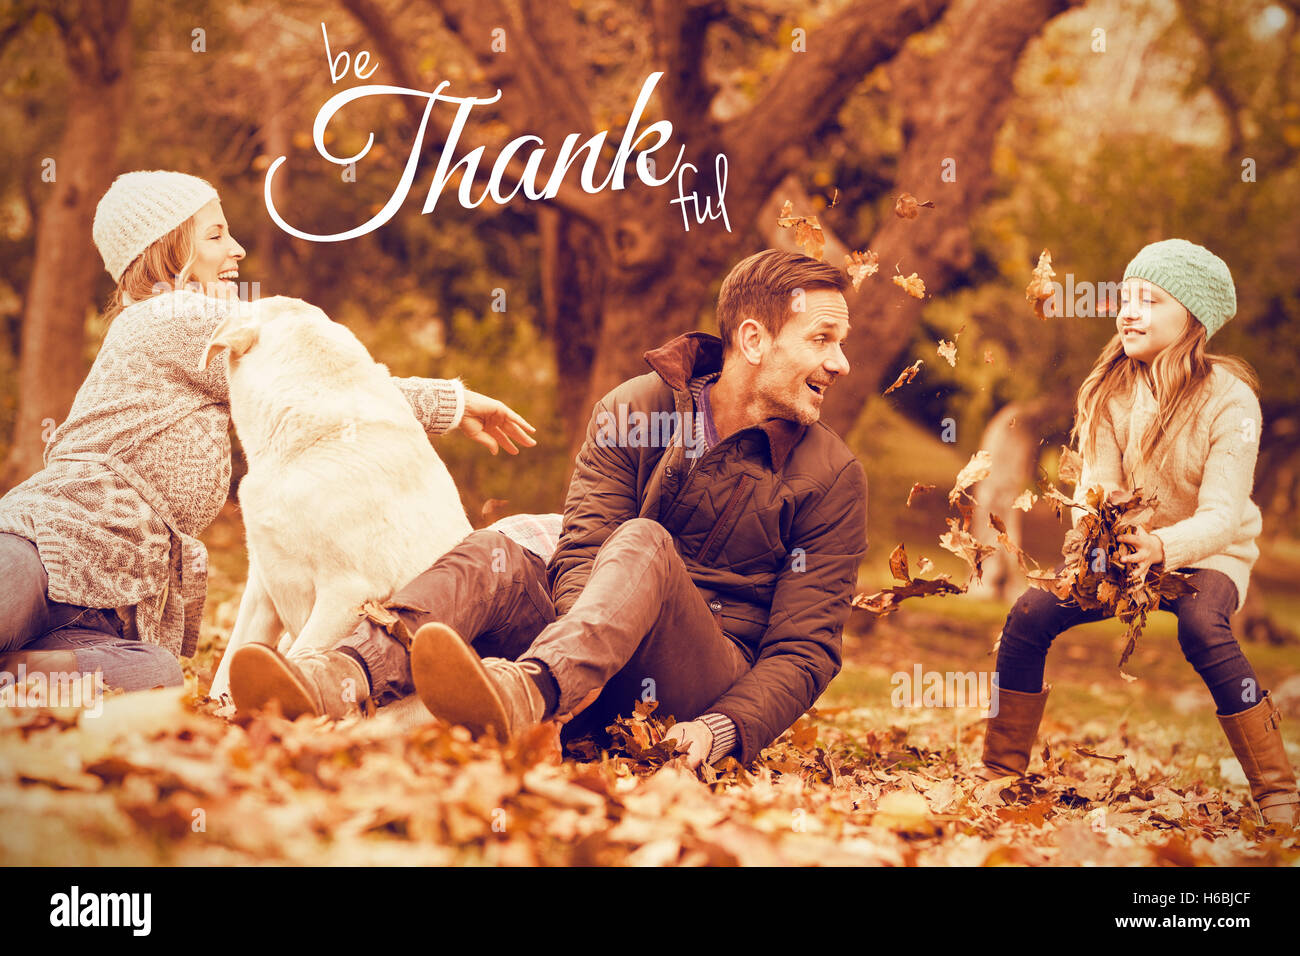 Composite image of digital image of happy thanksgiving day text greeting Stock Photo